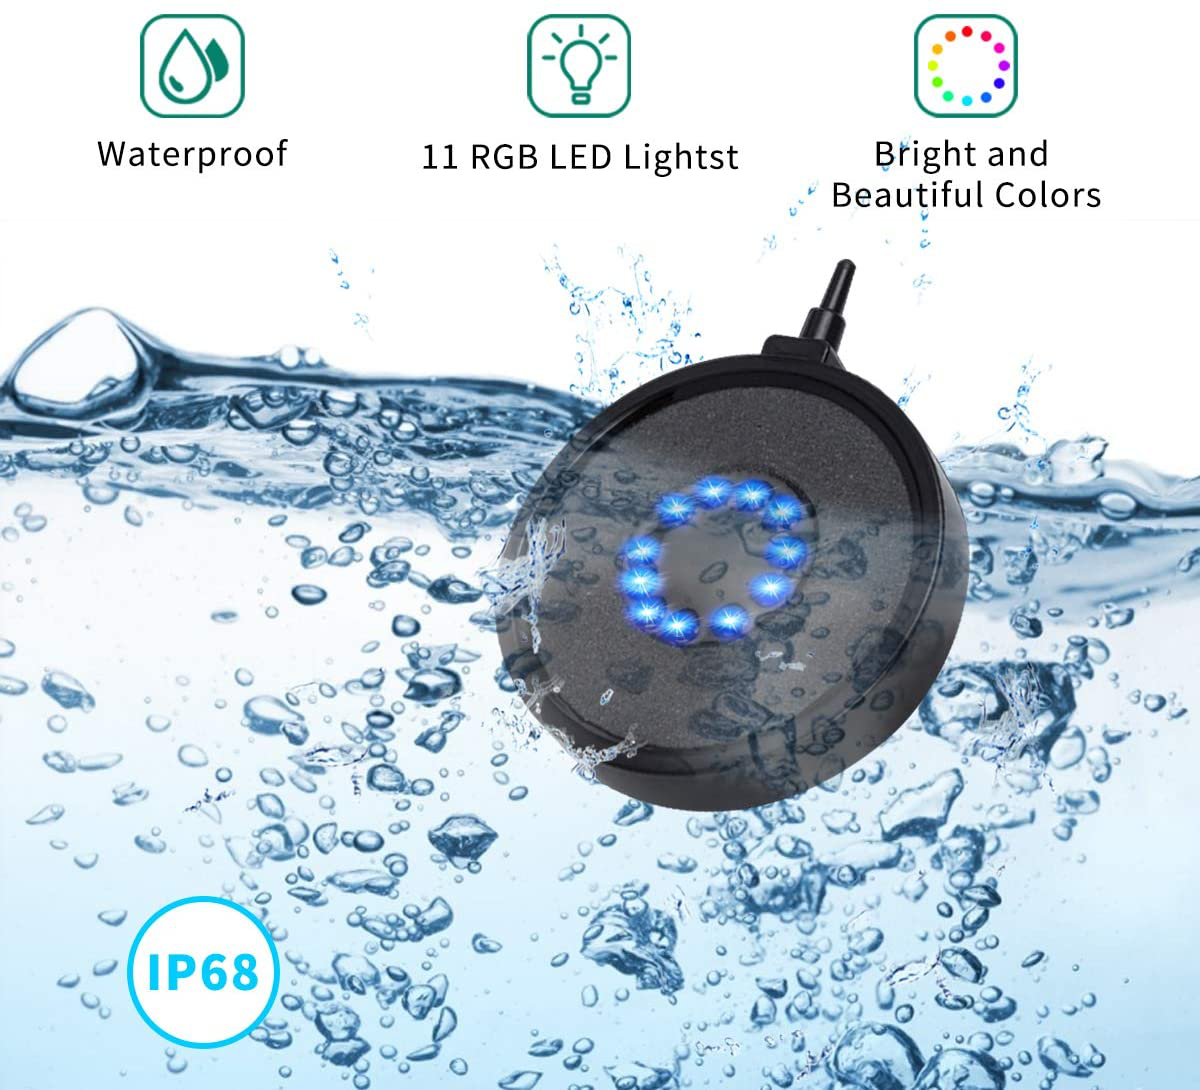 Number-One Aquarium Bubble Light LED Fish Tank Bubbler Light, Remote Controlled Aquariums Air Stone Disk Lamp with 16 Color Changing, 4 Lighting Effects for Fish Tanks and Fish Ponds